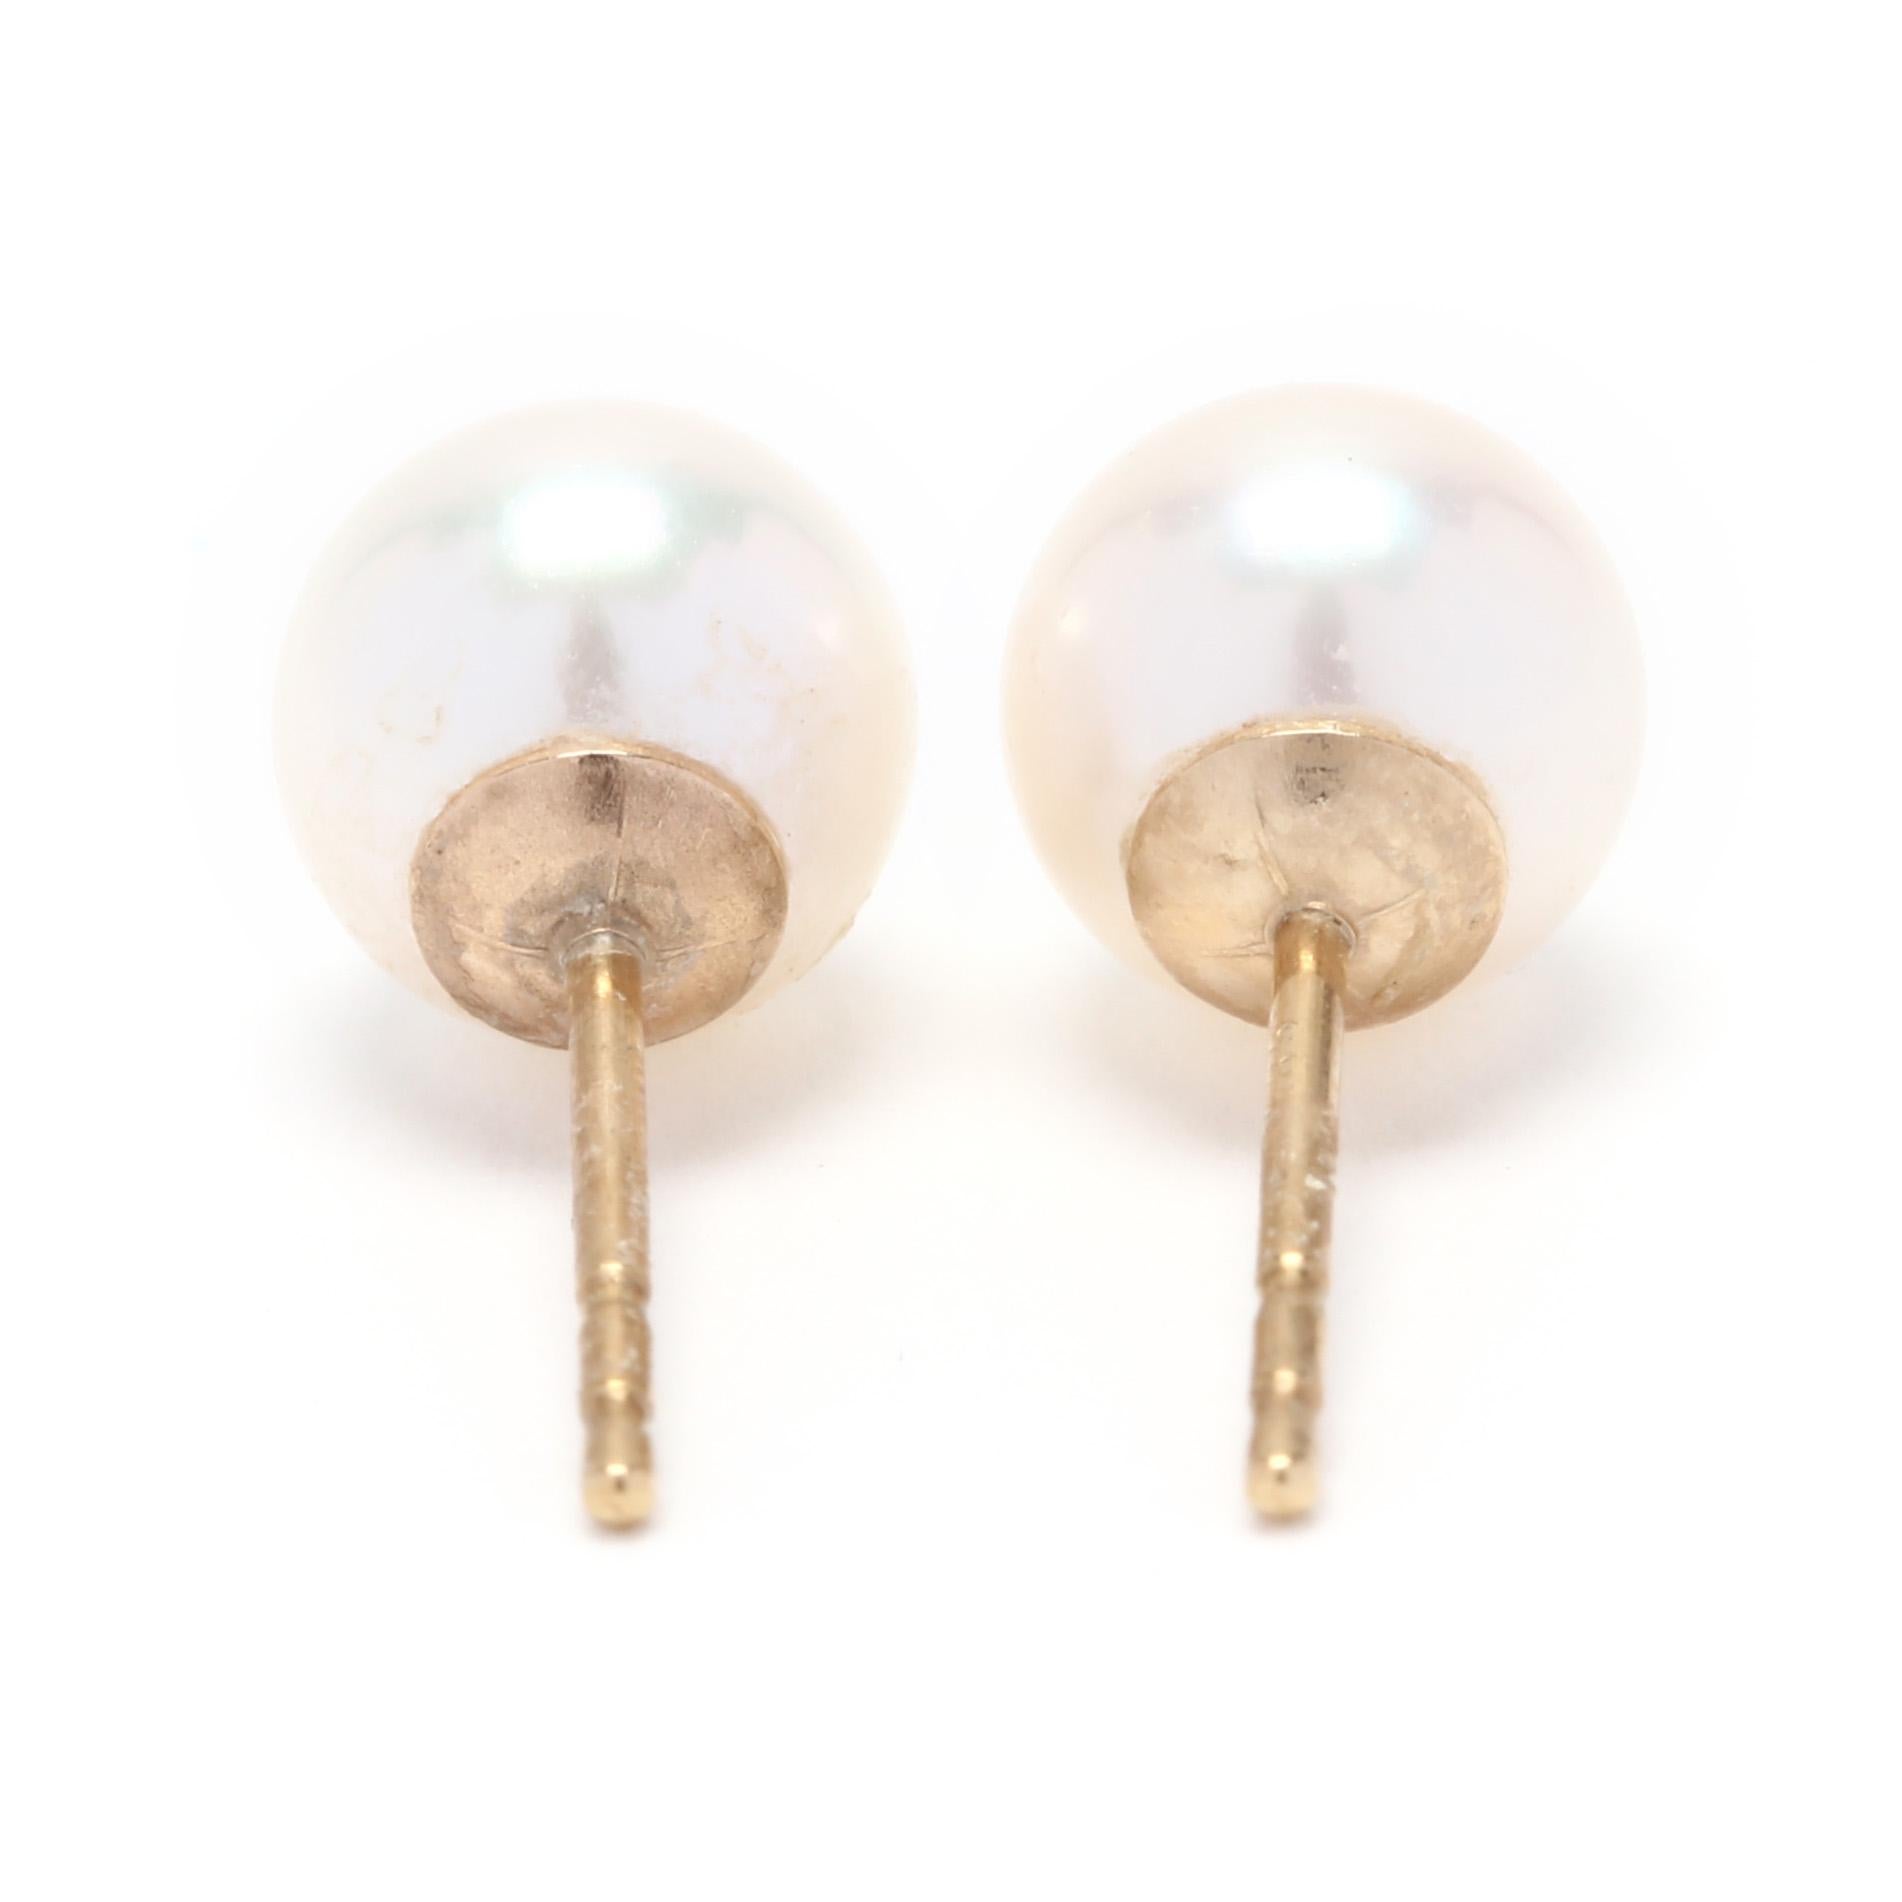 A pair of 14 karat yellow gold and pearl stud earrings. These earrings feature two round cream pearls (6.60 mm) with rose overtones, good luster and with push backs.

Stones:
- pearls
- round bead, 2 stones
- 6.60 mm

.92 dwts.

* Please note that